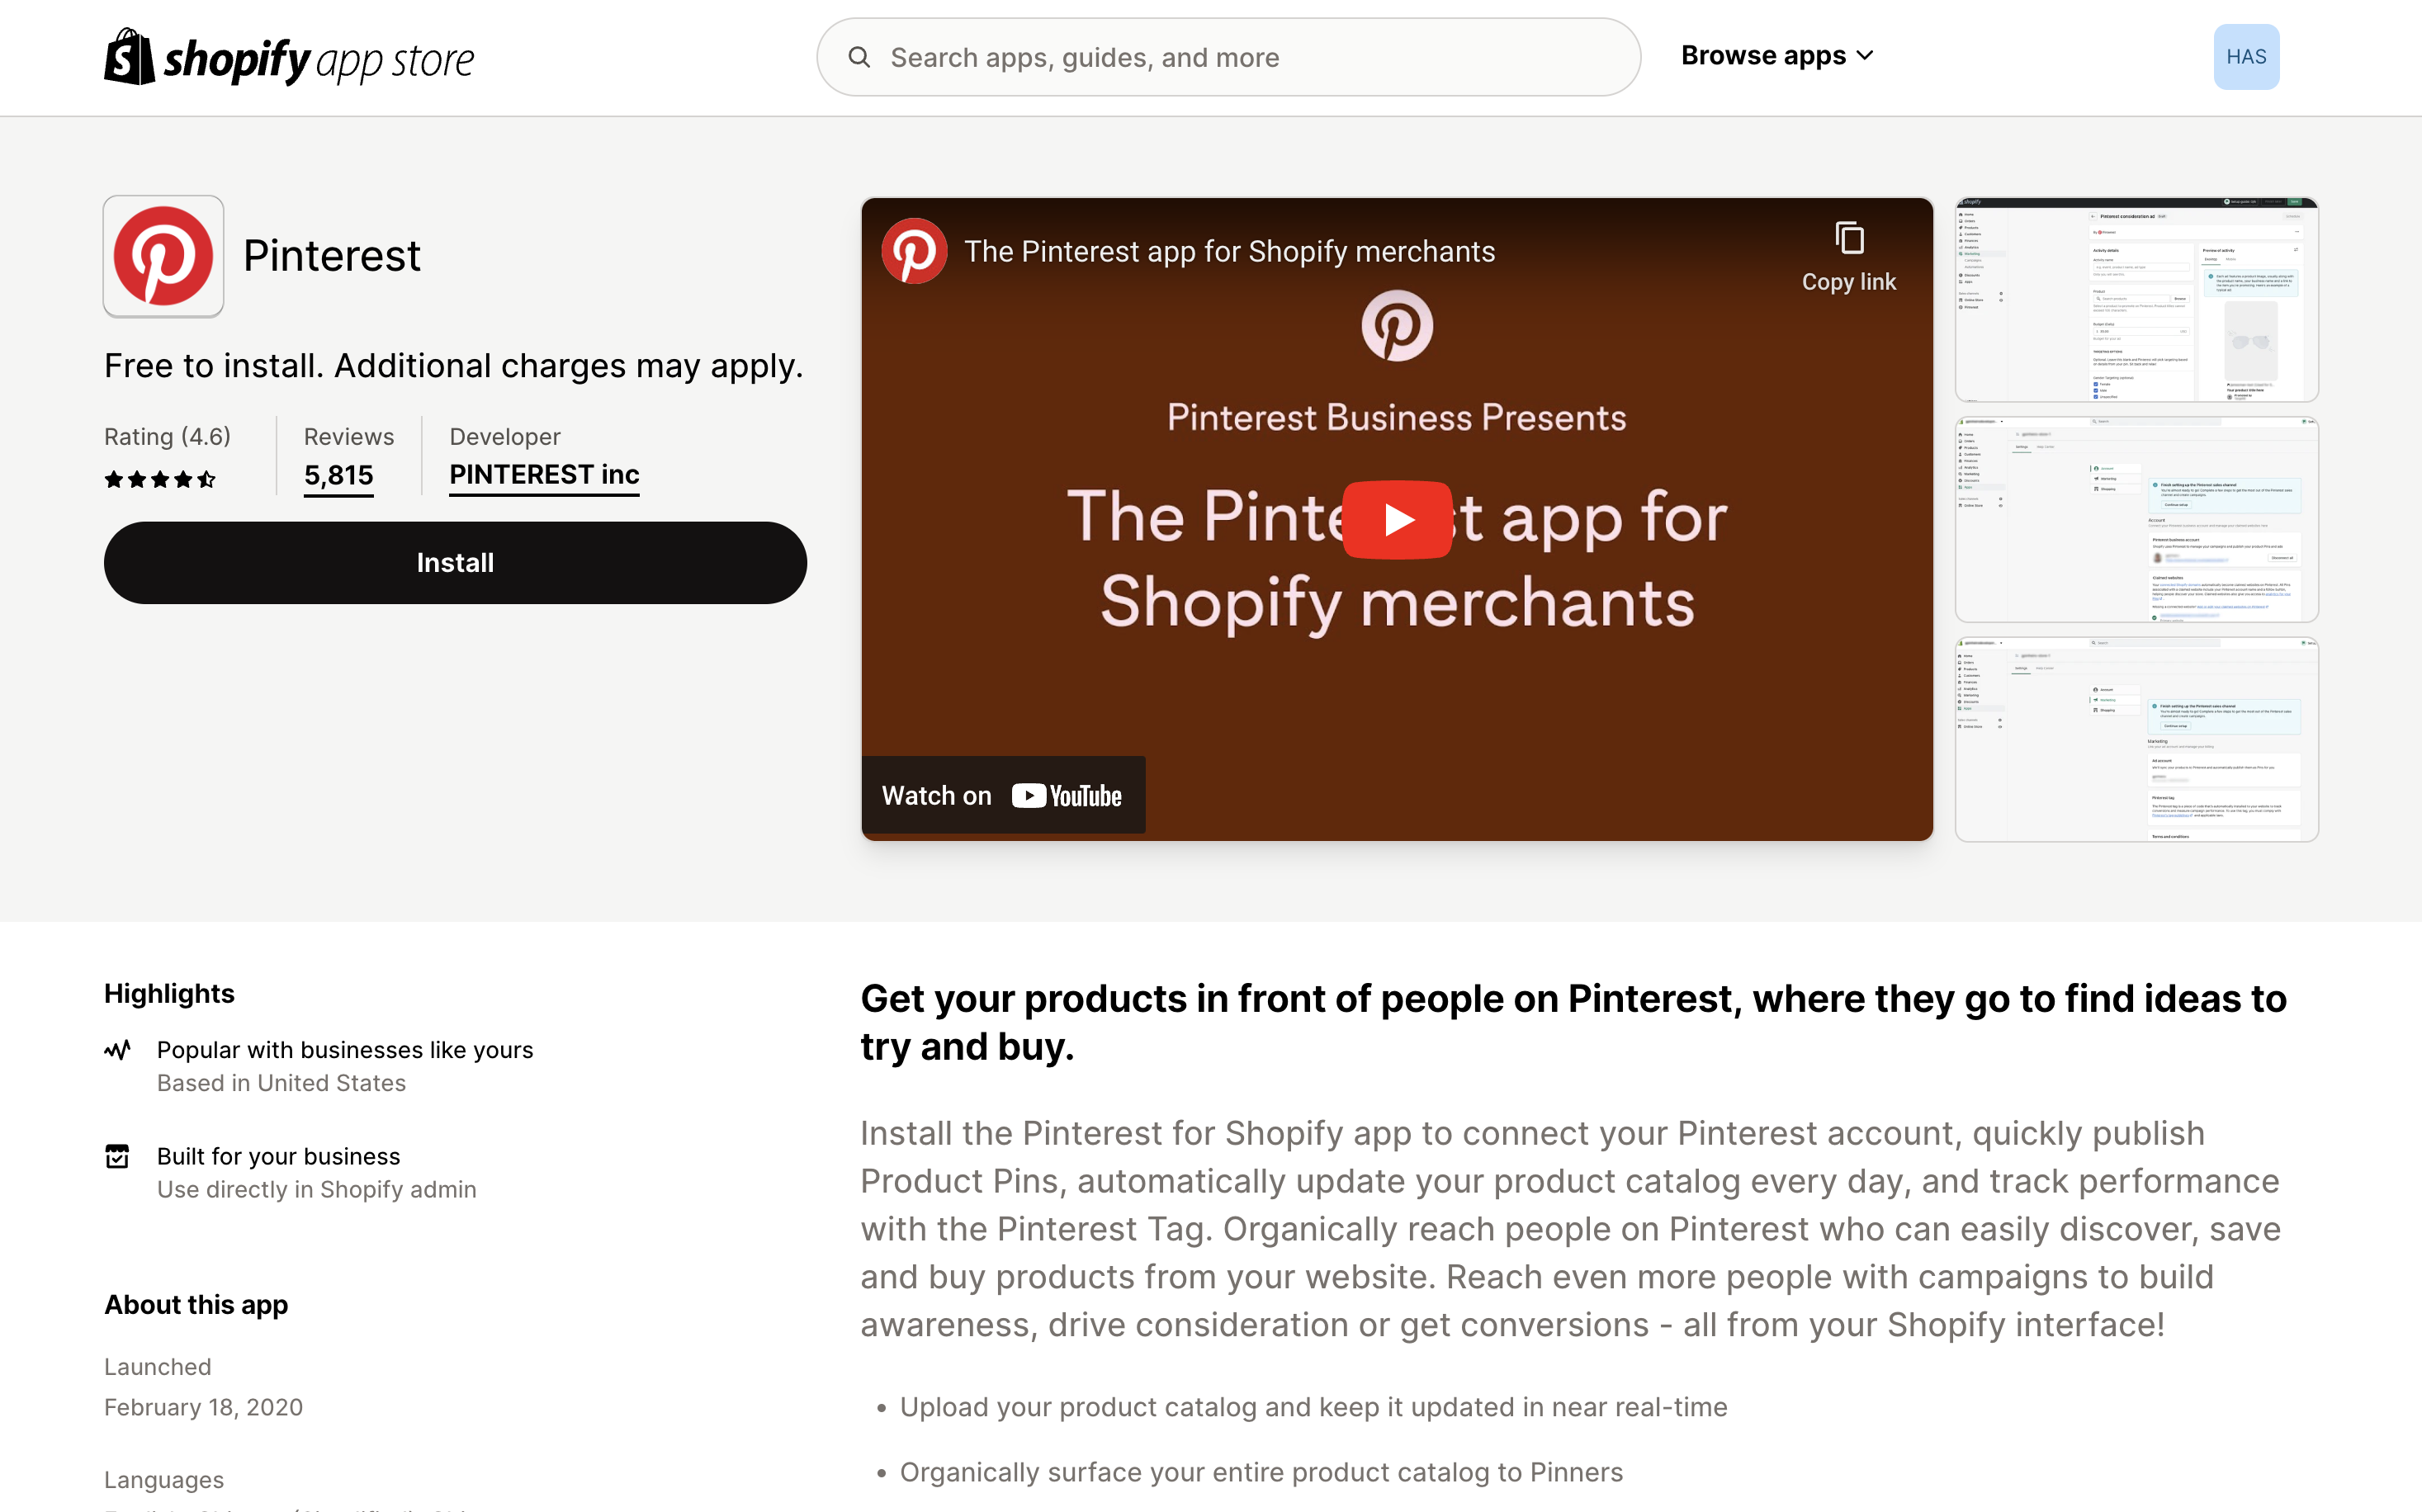 Pinterest has a public Shopify app that any store can install – https://apps.shopify.com/pinterest